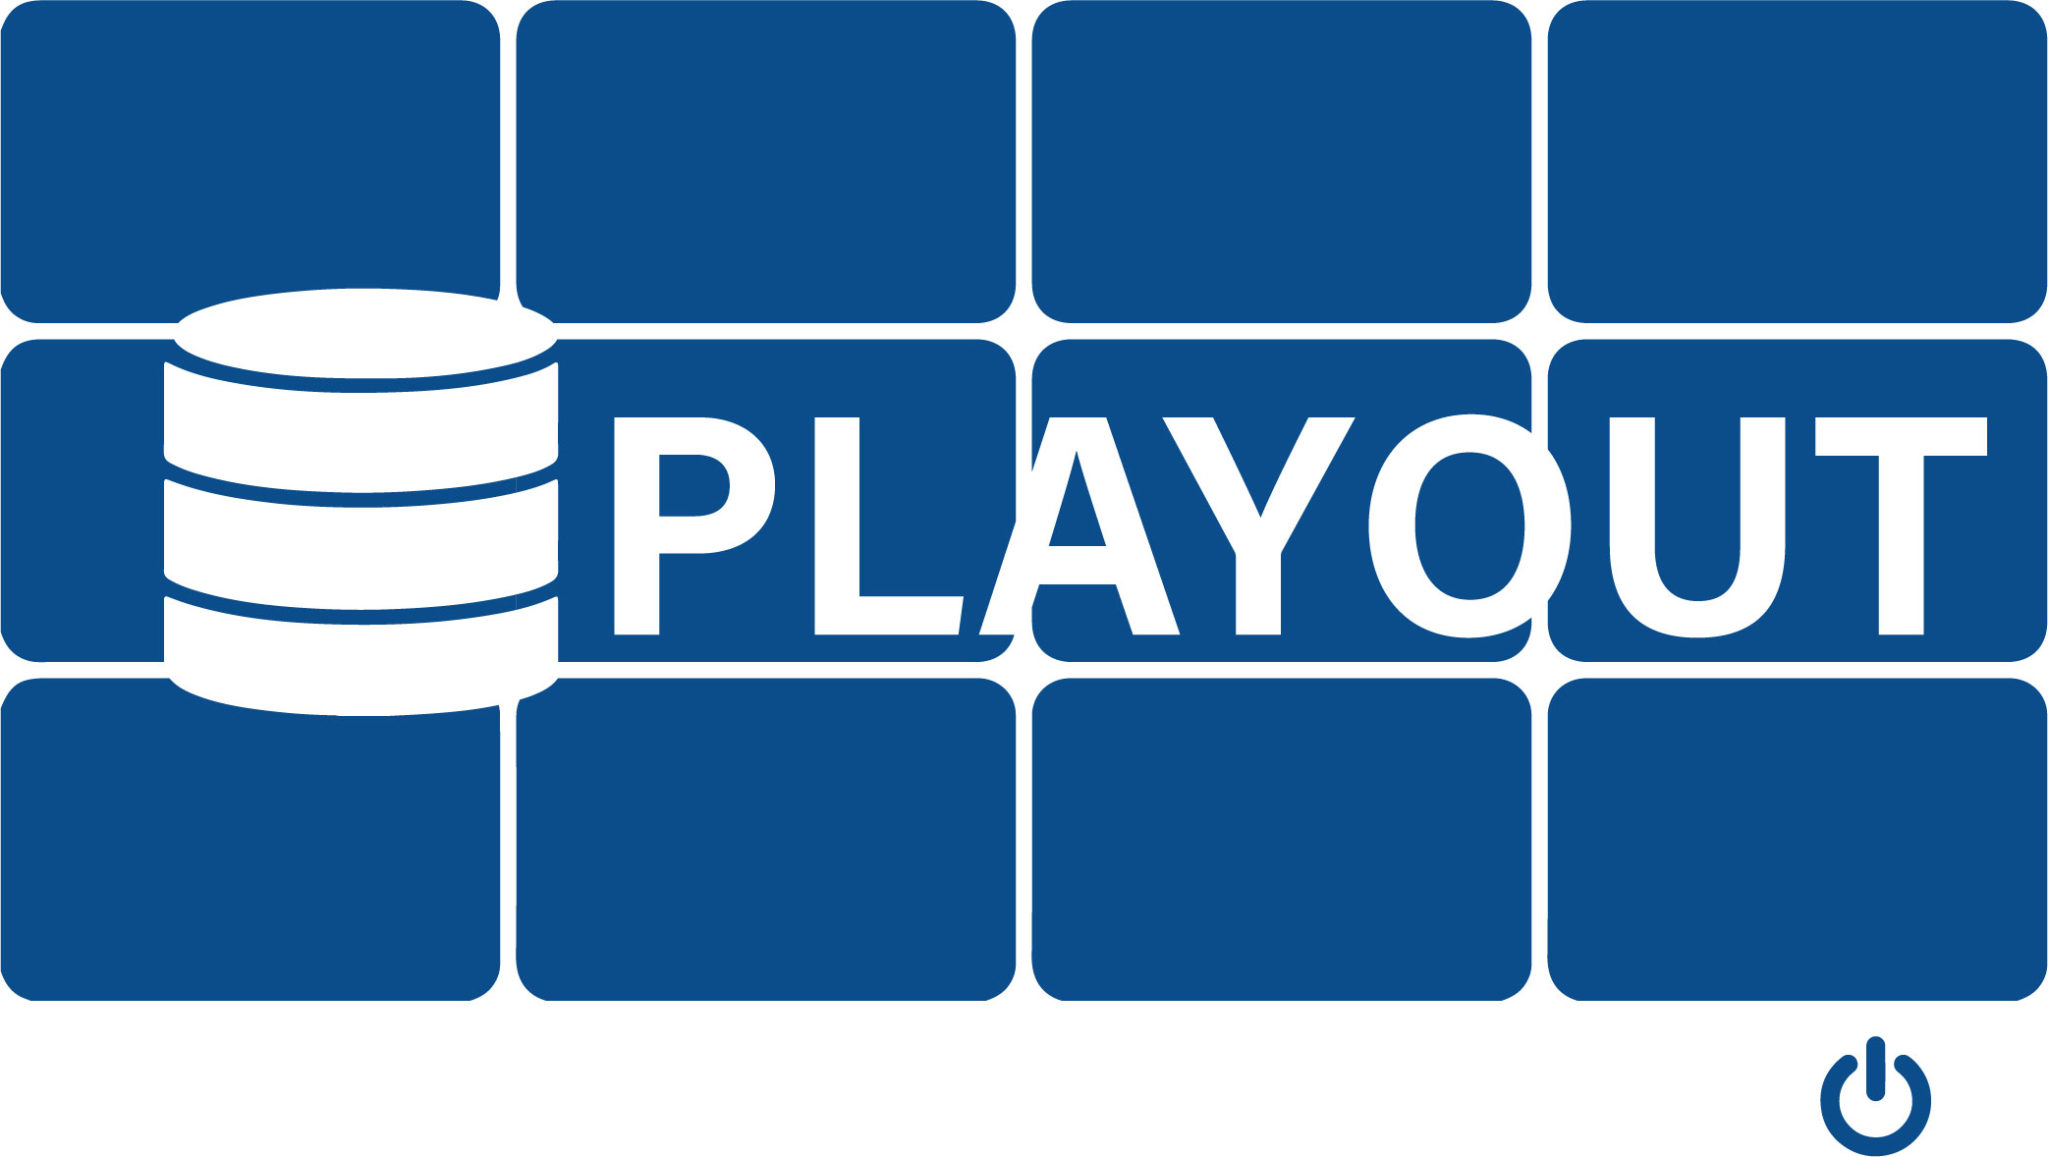 TAG Playout Graphic 